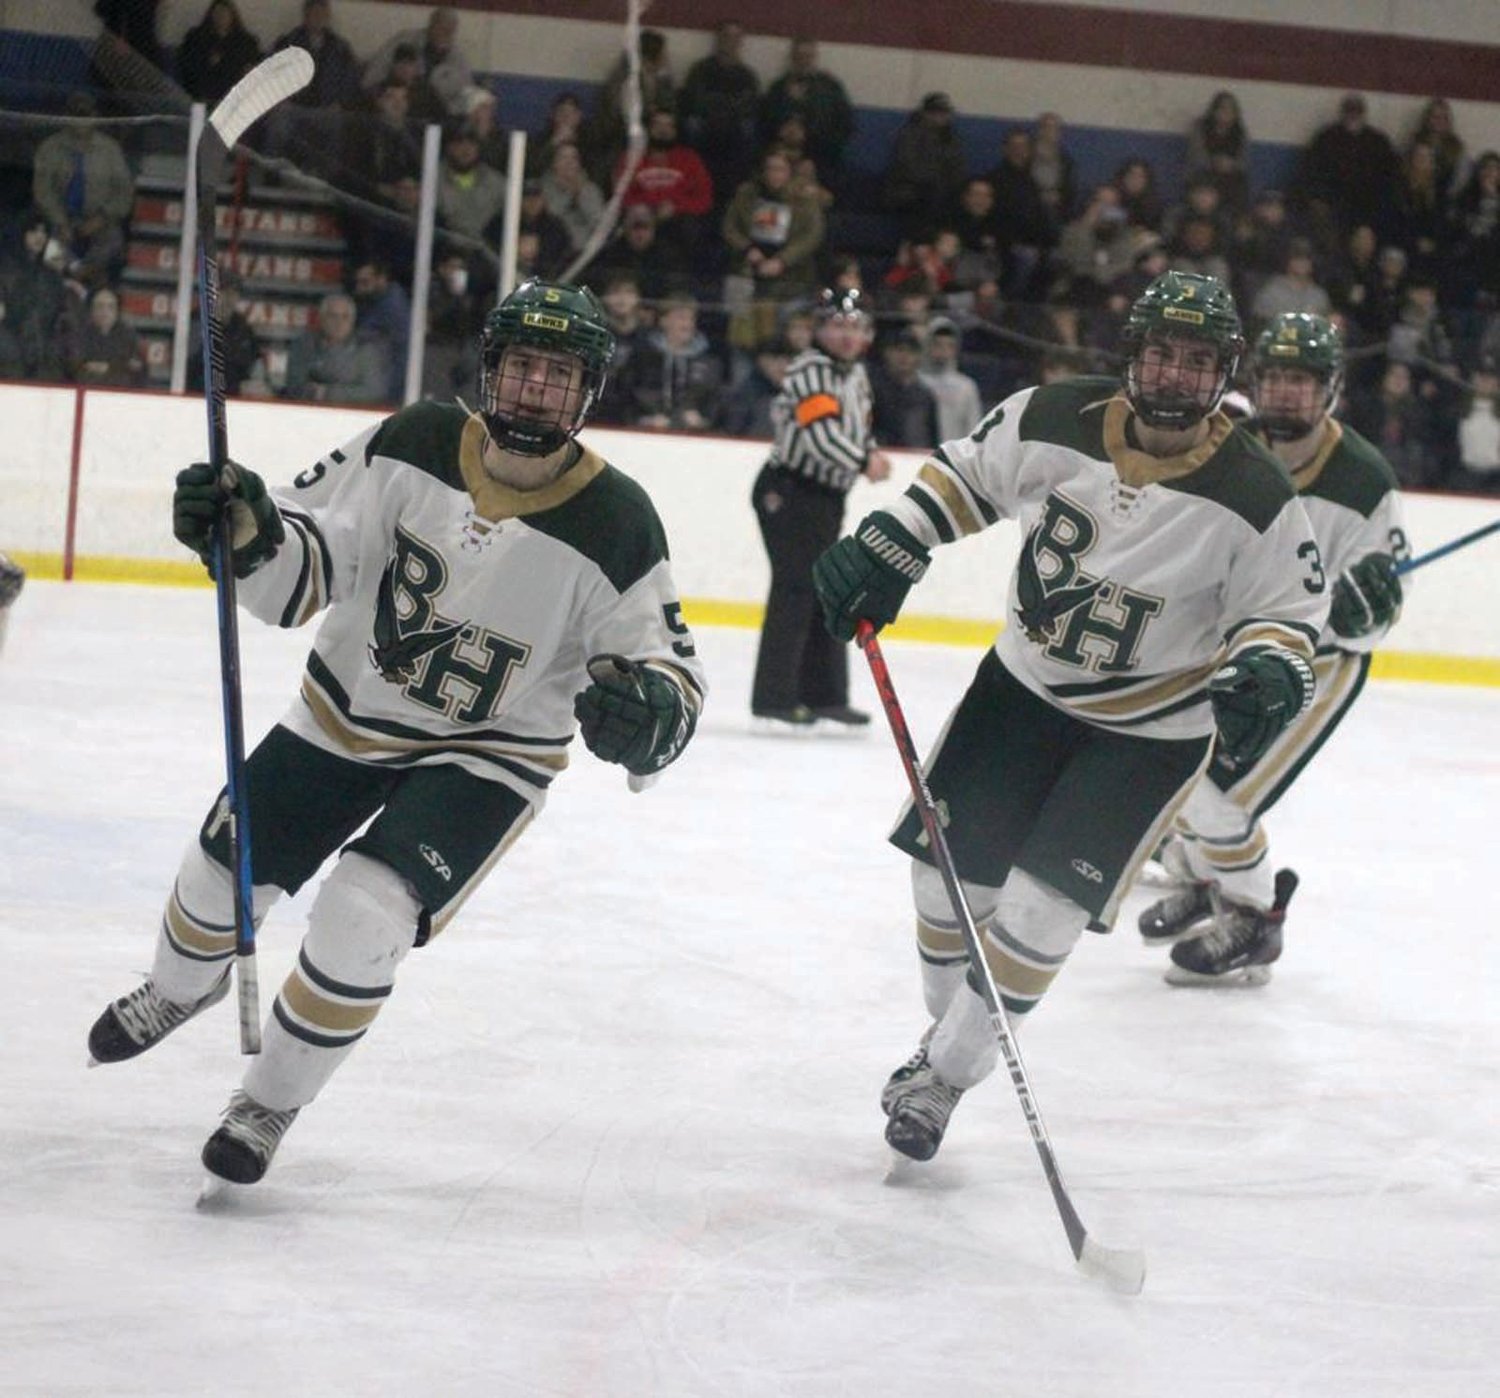 PULLING OFF THE UPSET: Bishop Hendricken’s Drew Gayman and Griffin Crain celebrate after scoring a goal against La Salle in the DI Semifinals last week at Thayer Arena.